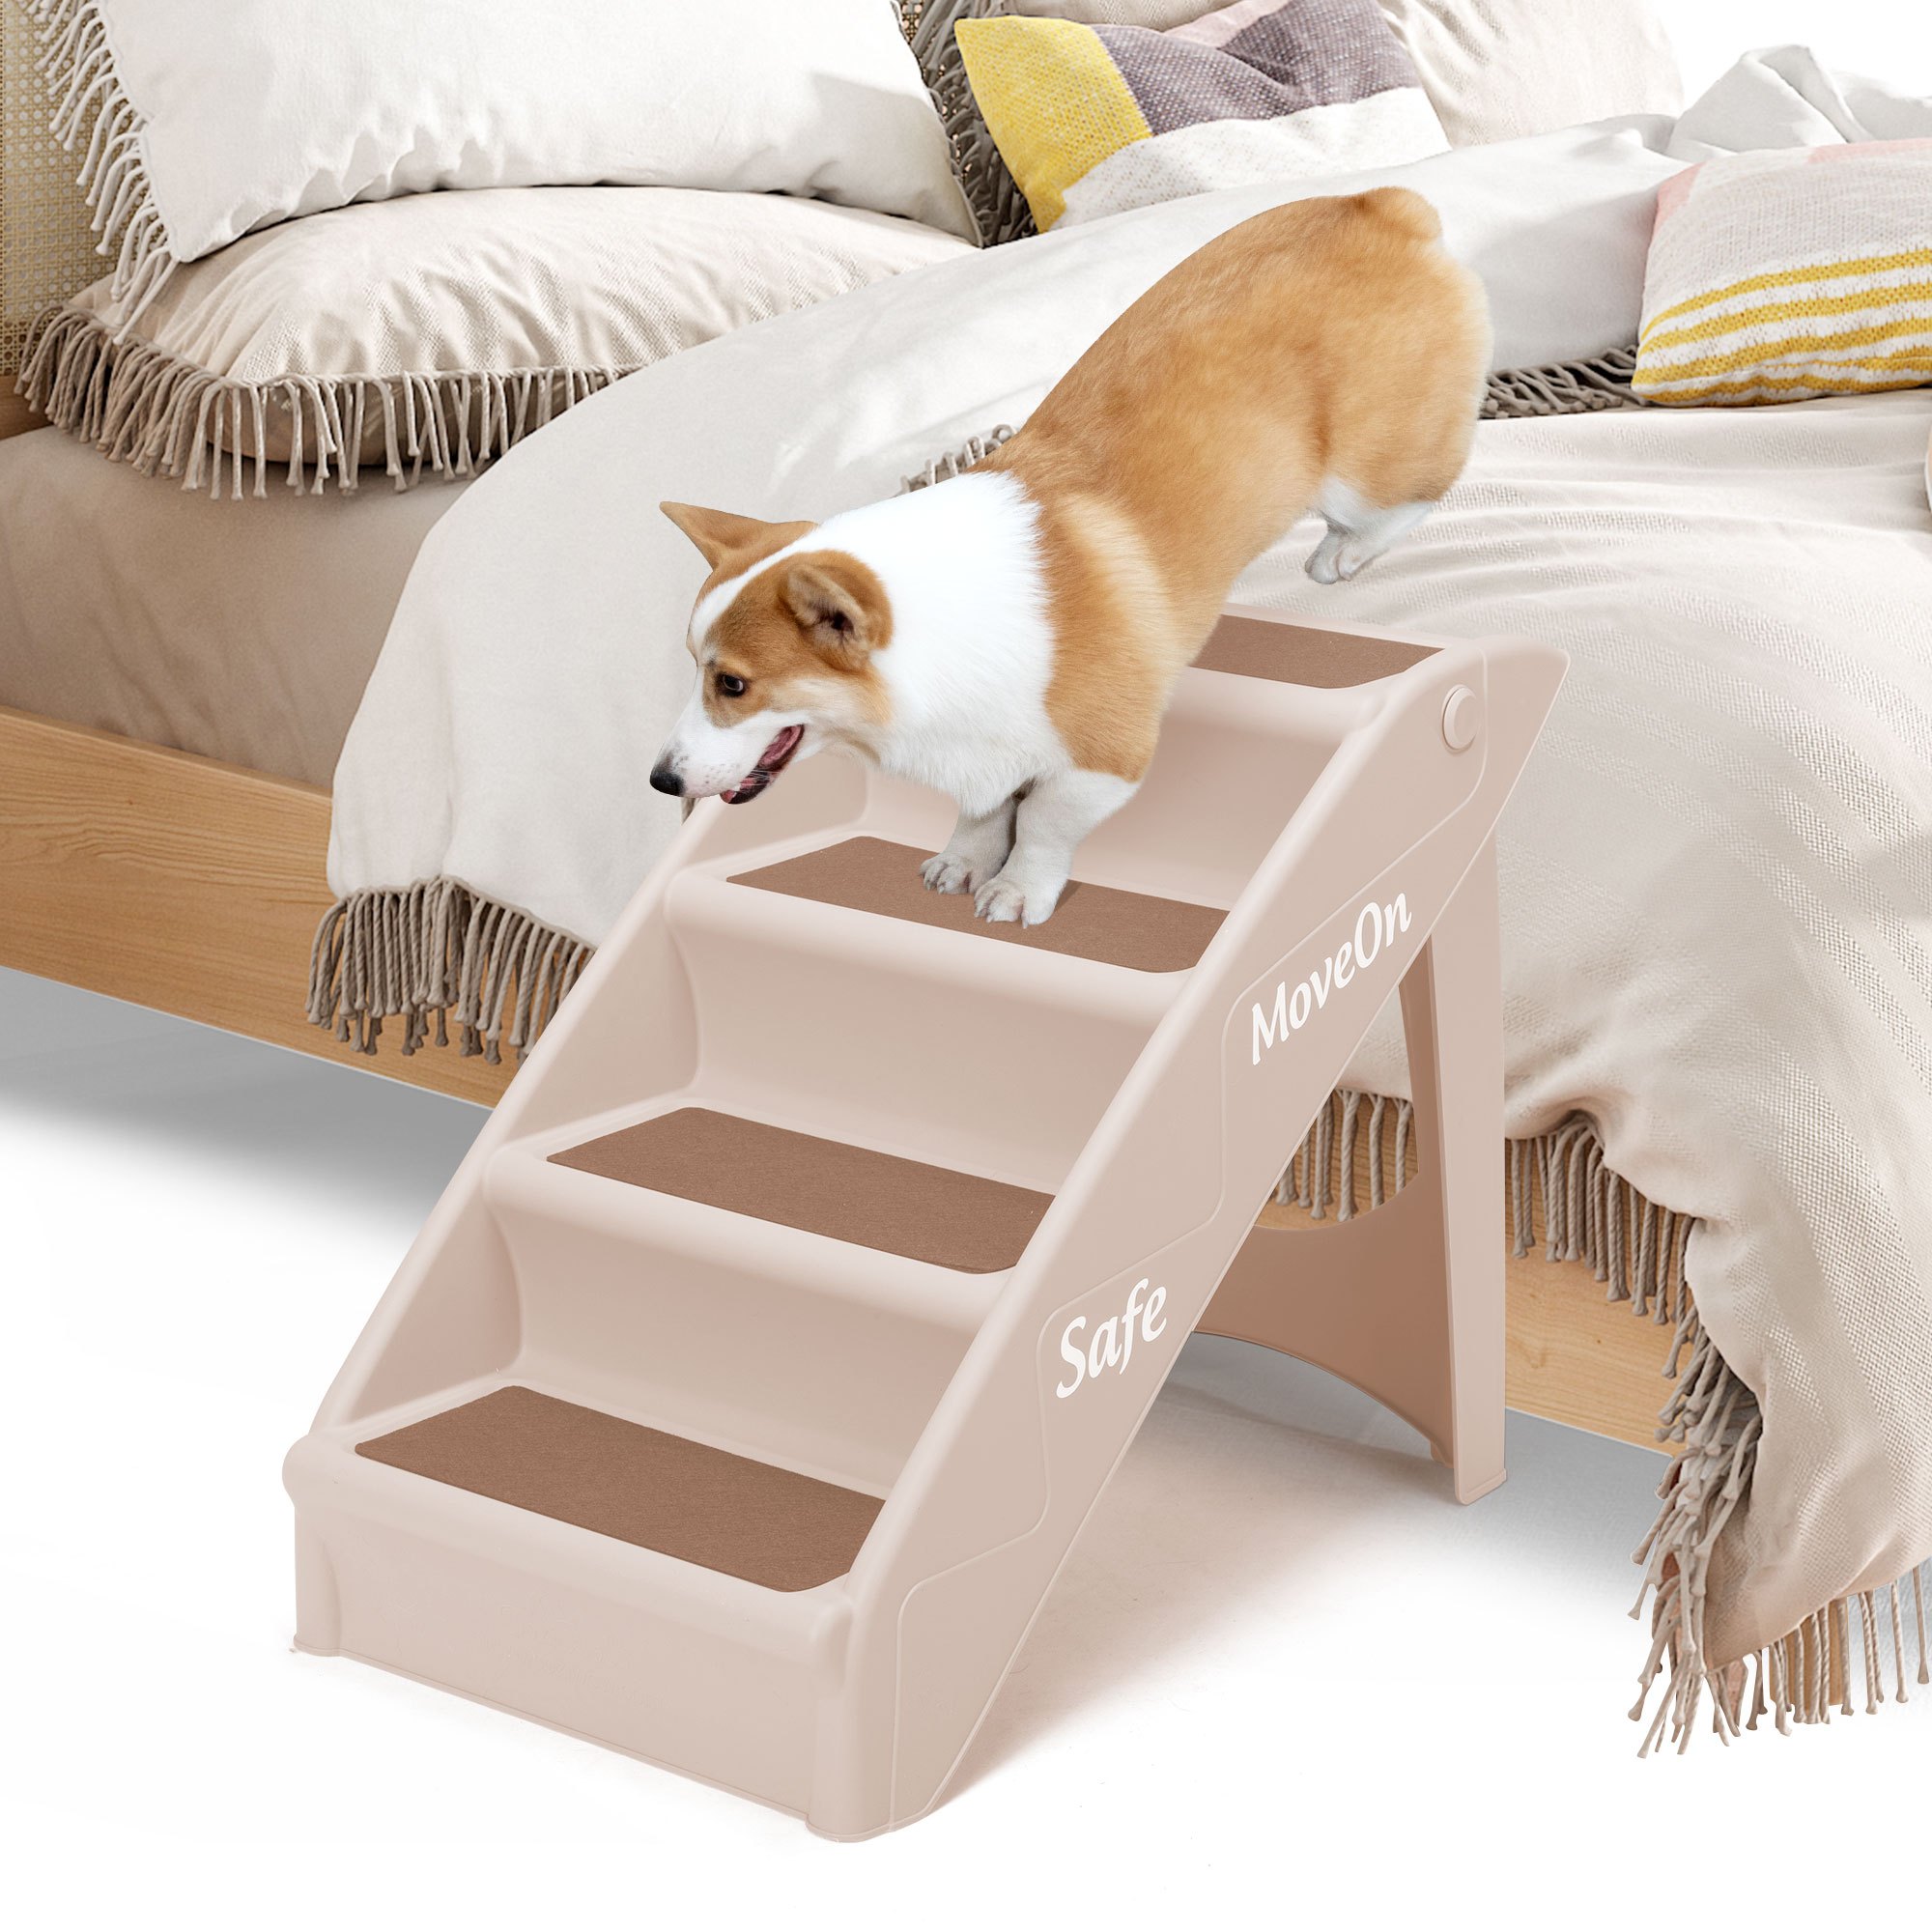 

4-step Foldable Dog Stair To Get Up On The Beds Dog Ramp For Small Dog With Non-slip Pads